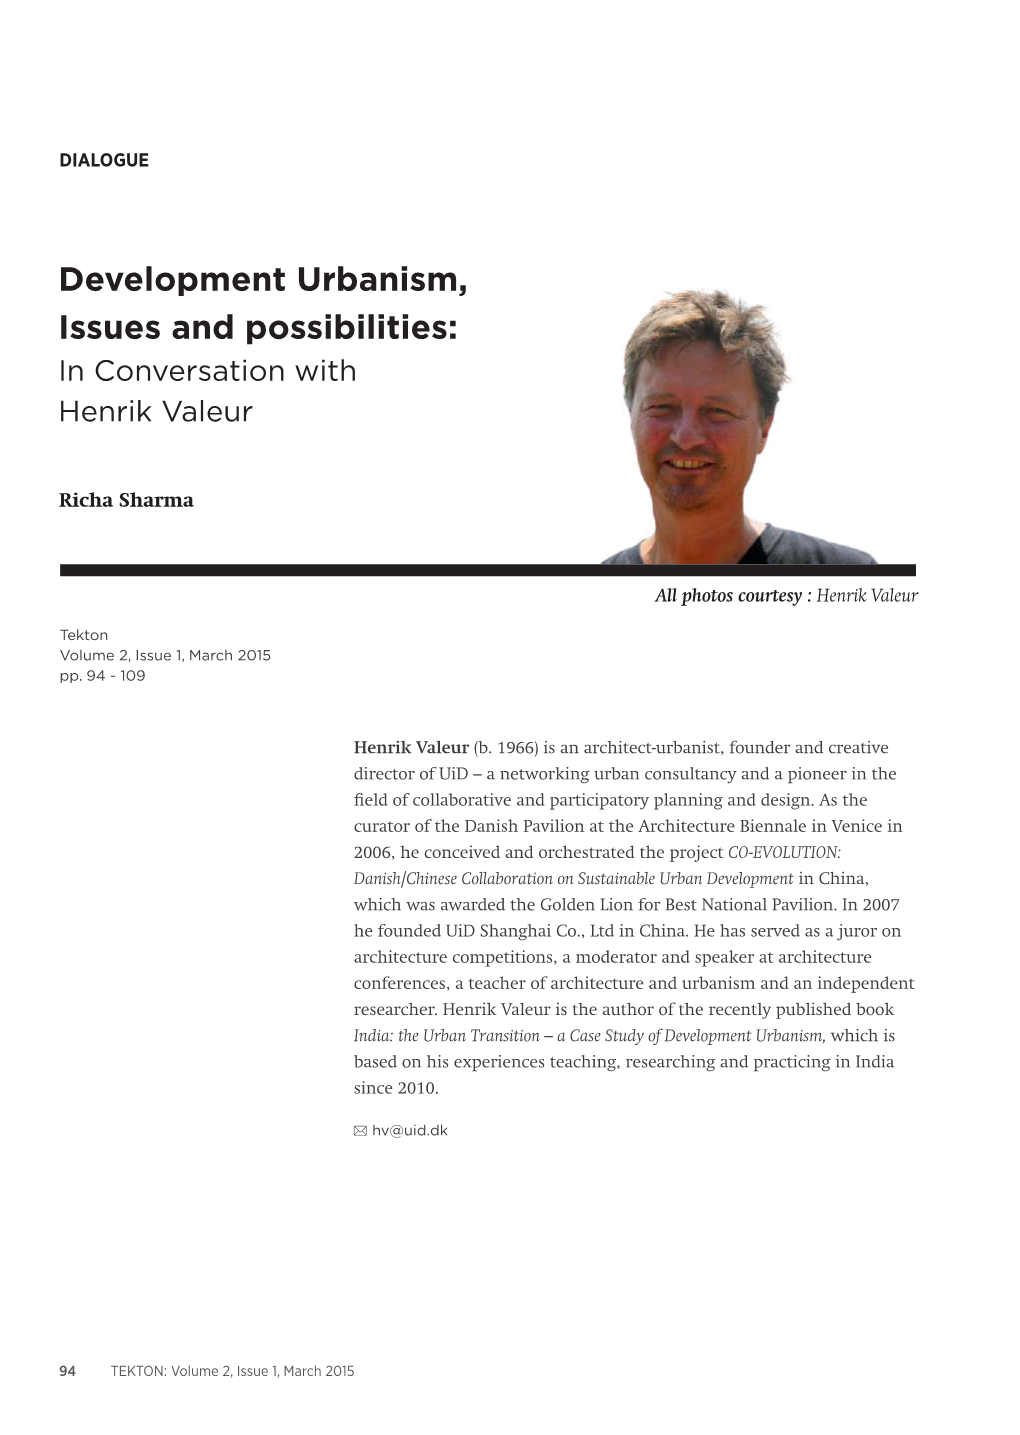 Development Urbanism, Issues and Possibilities: in Conversation with Henrik Valeur